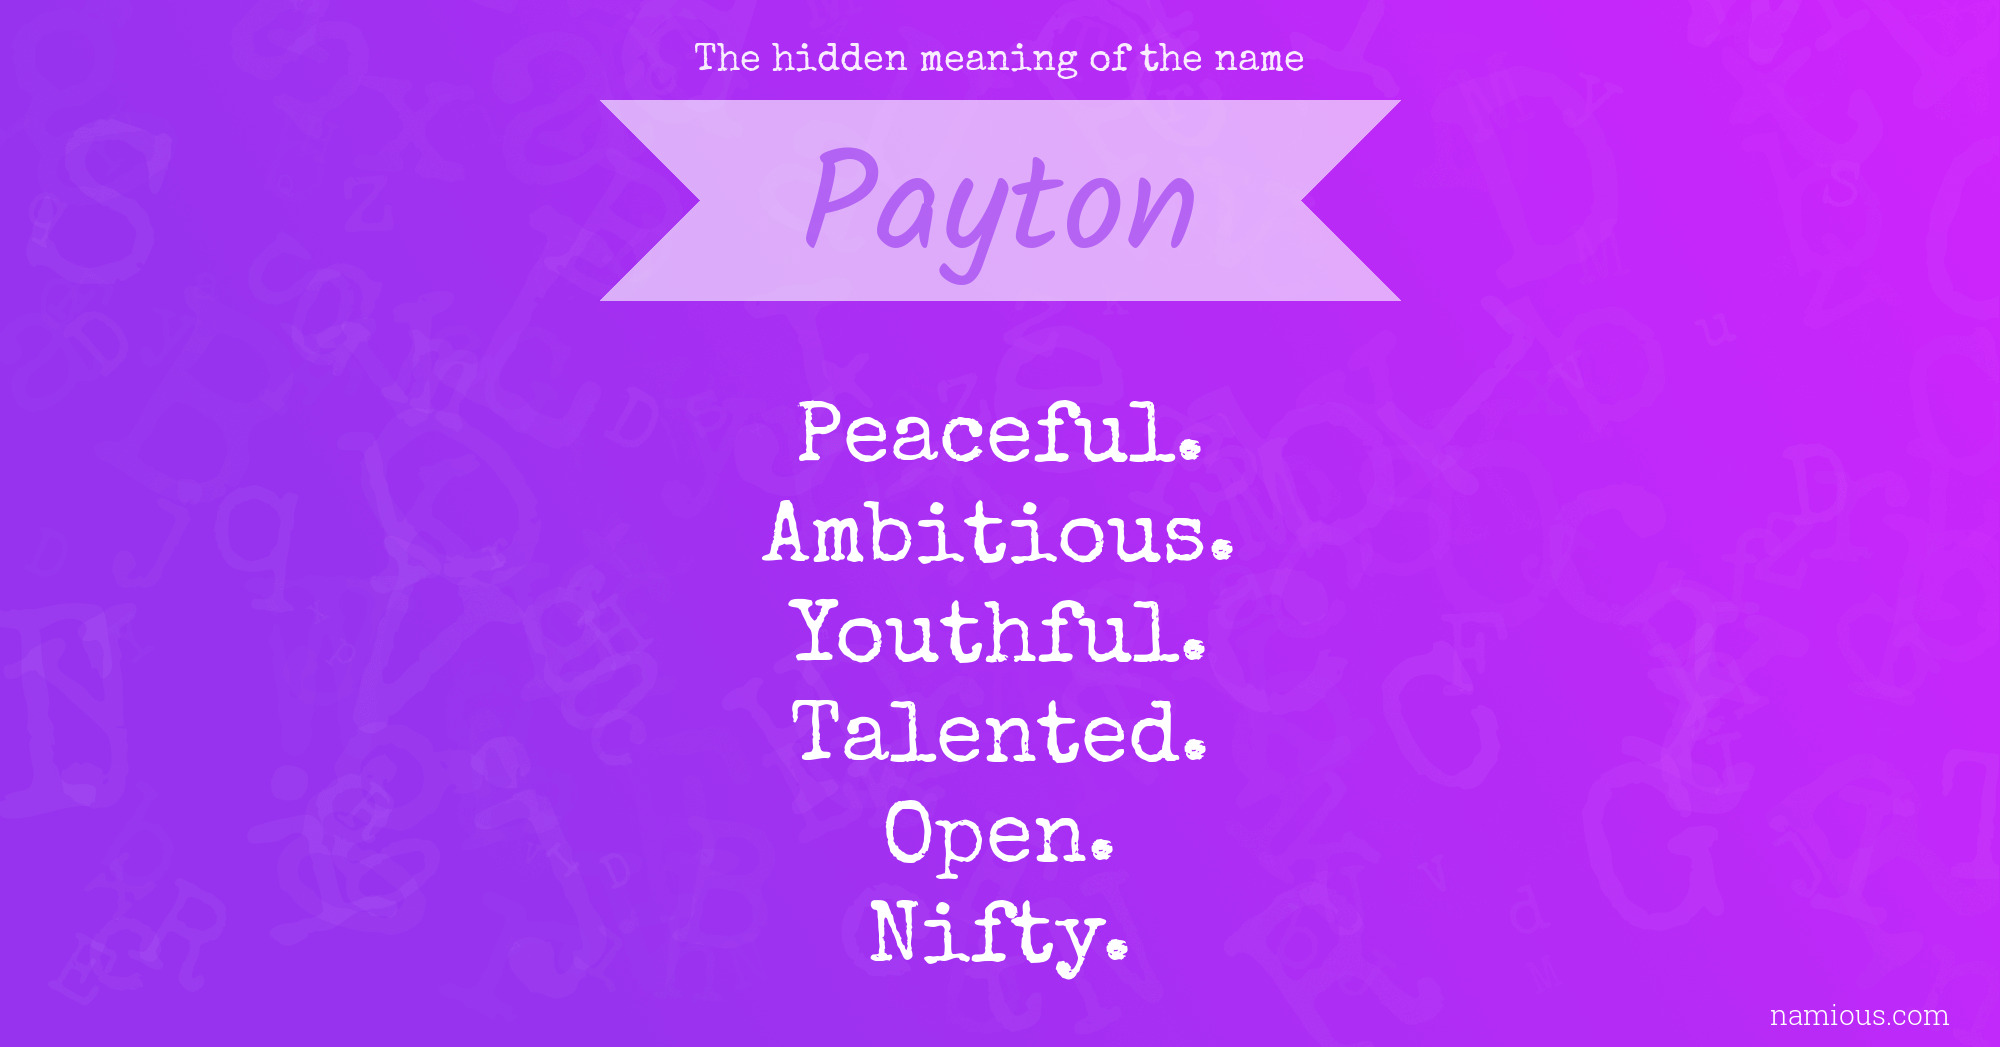 The hidden meaning of the name Payton